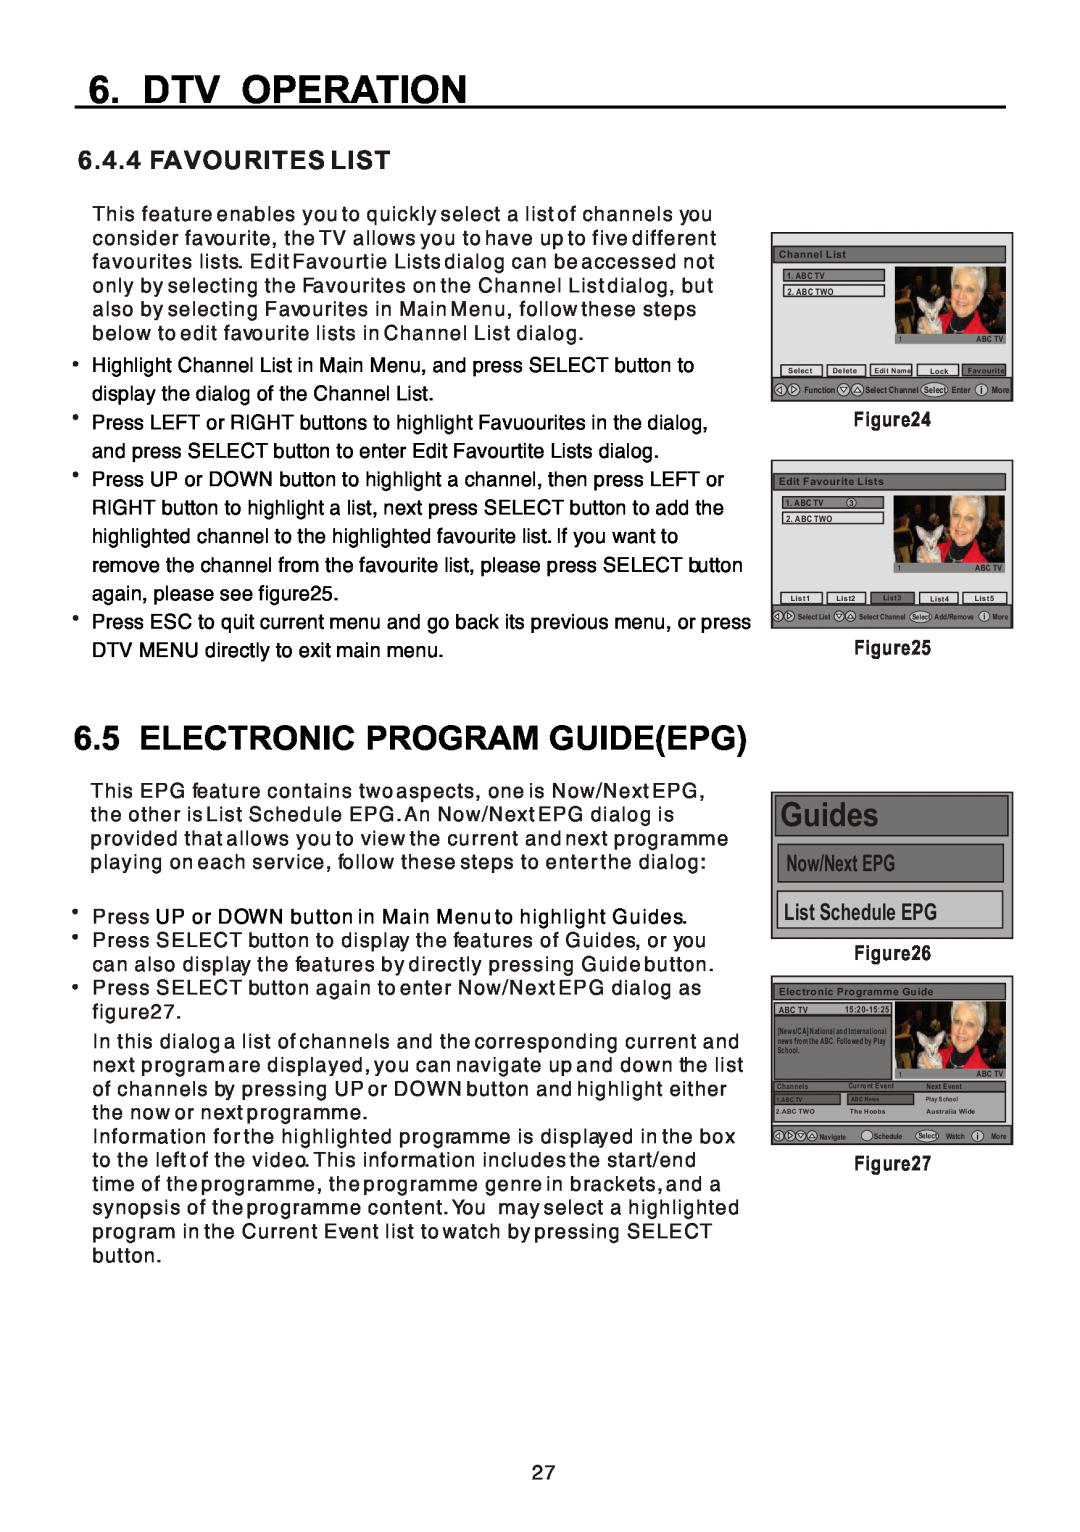 Teac CT-W32ID Electronic Program Guideepg, Guides, Favourites List, Now/Next EPG List Schedule EPG, Dtv Operation 